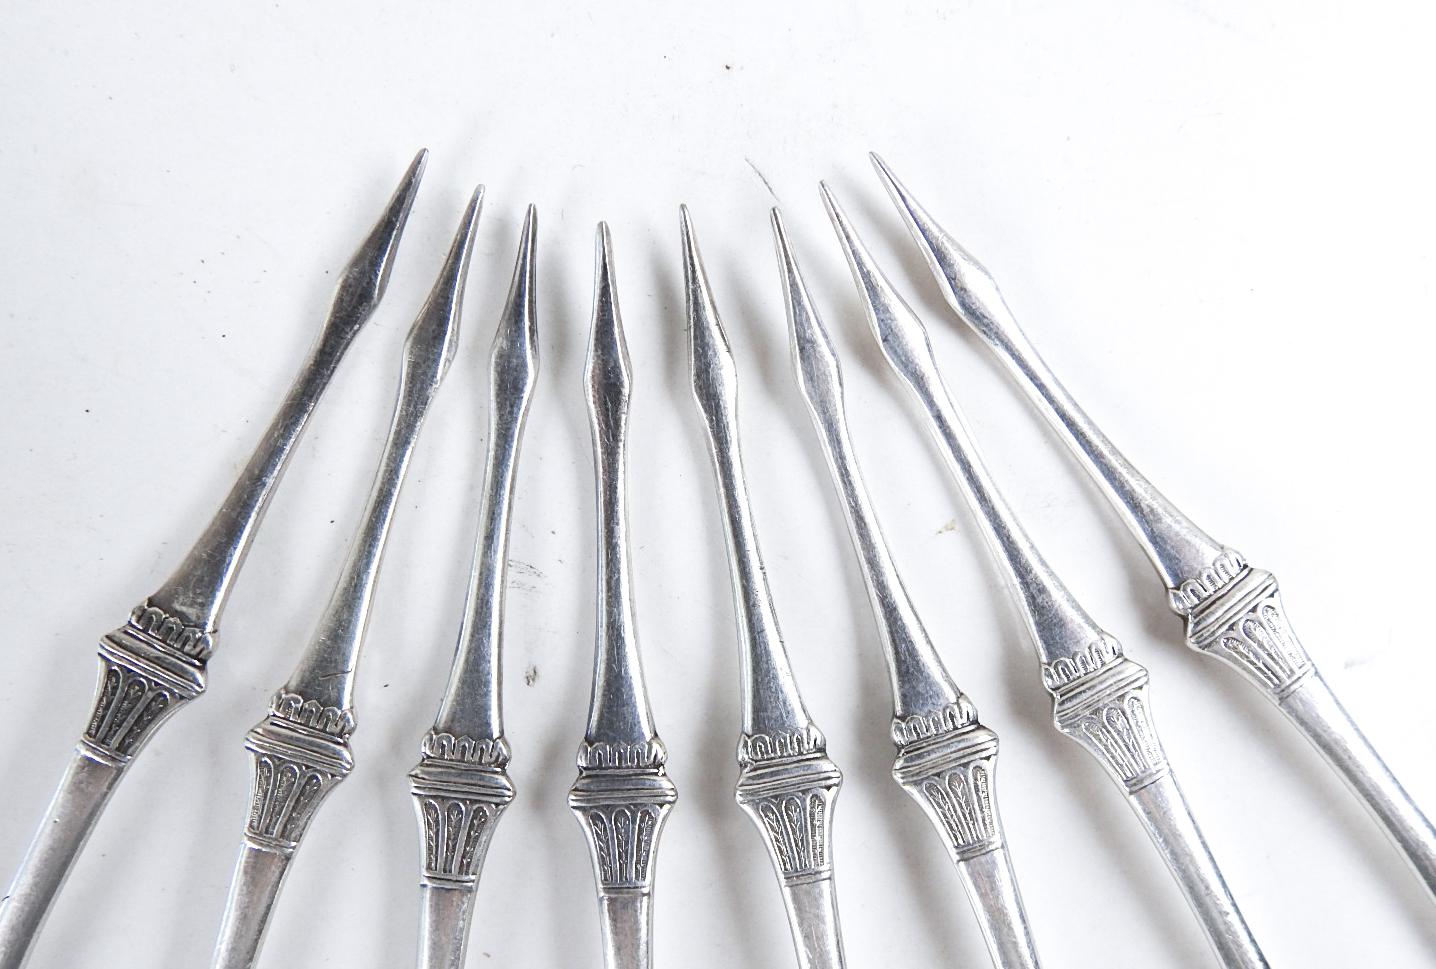 Antique 1860s Silverplate Aesthetic Movement Nut Cheese Picks - Set of 8 In Good Condition For Sale In Seguin, TX